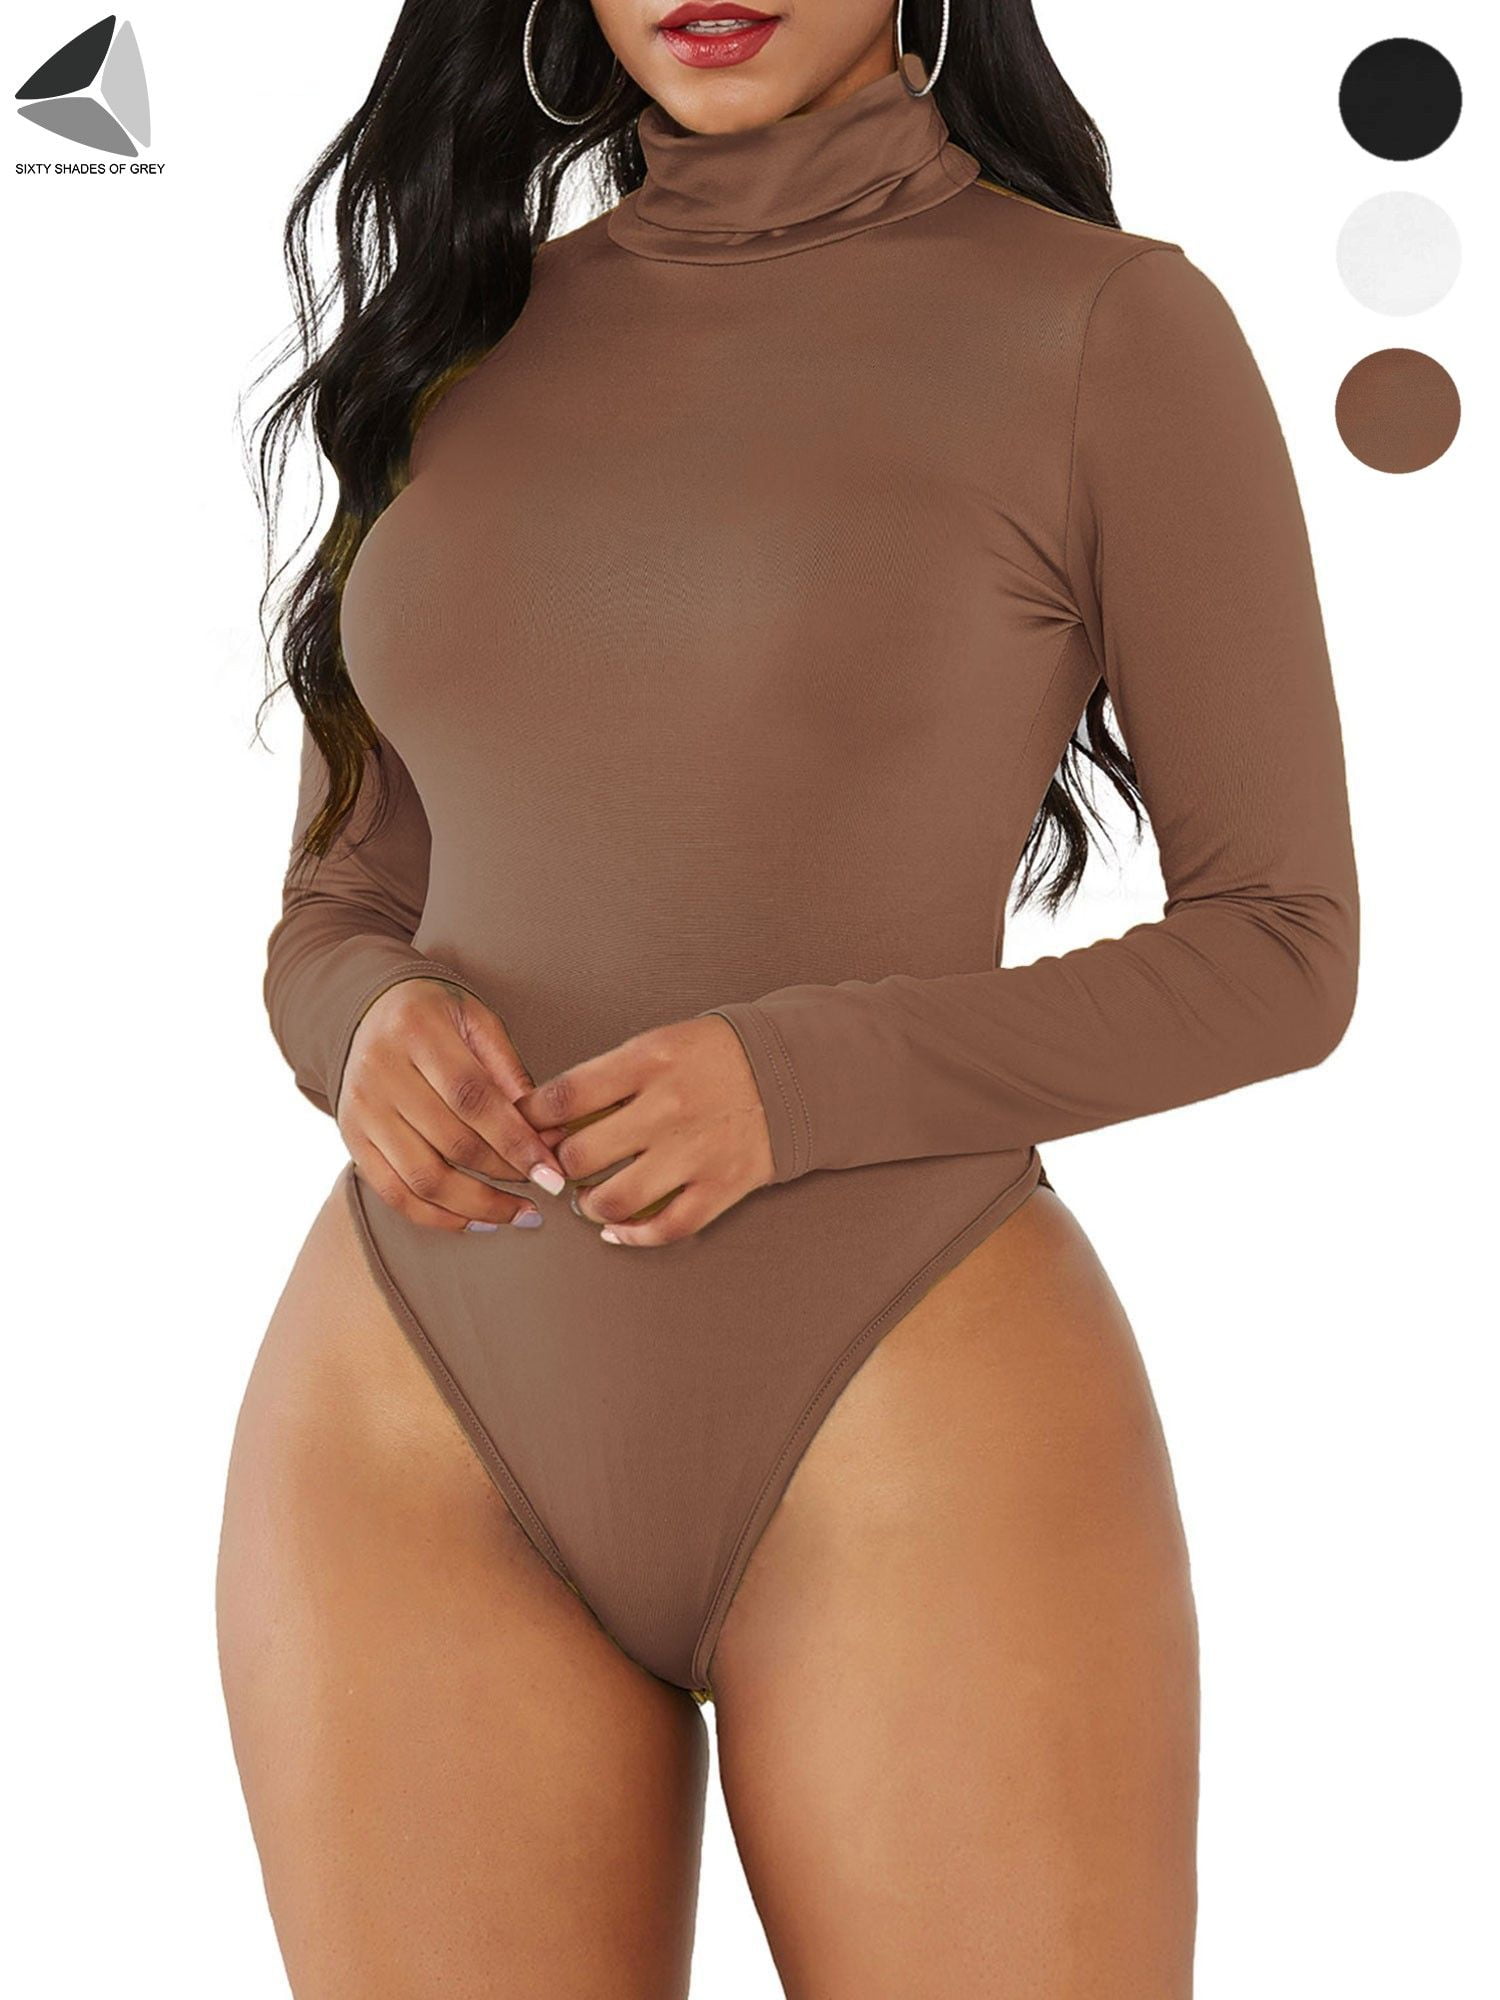 PULLIMORE Womens High Neck Tops Bodysuit Turtleneck Long Sleeve Stretchy  Bodycon Jumpsuit (M, Brown) 